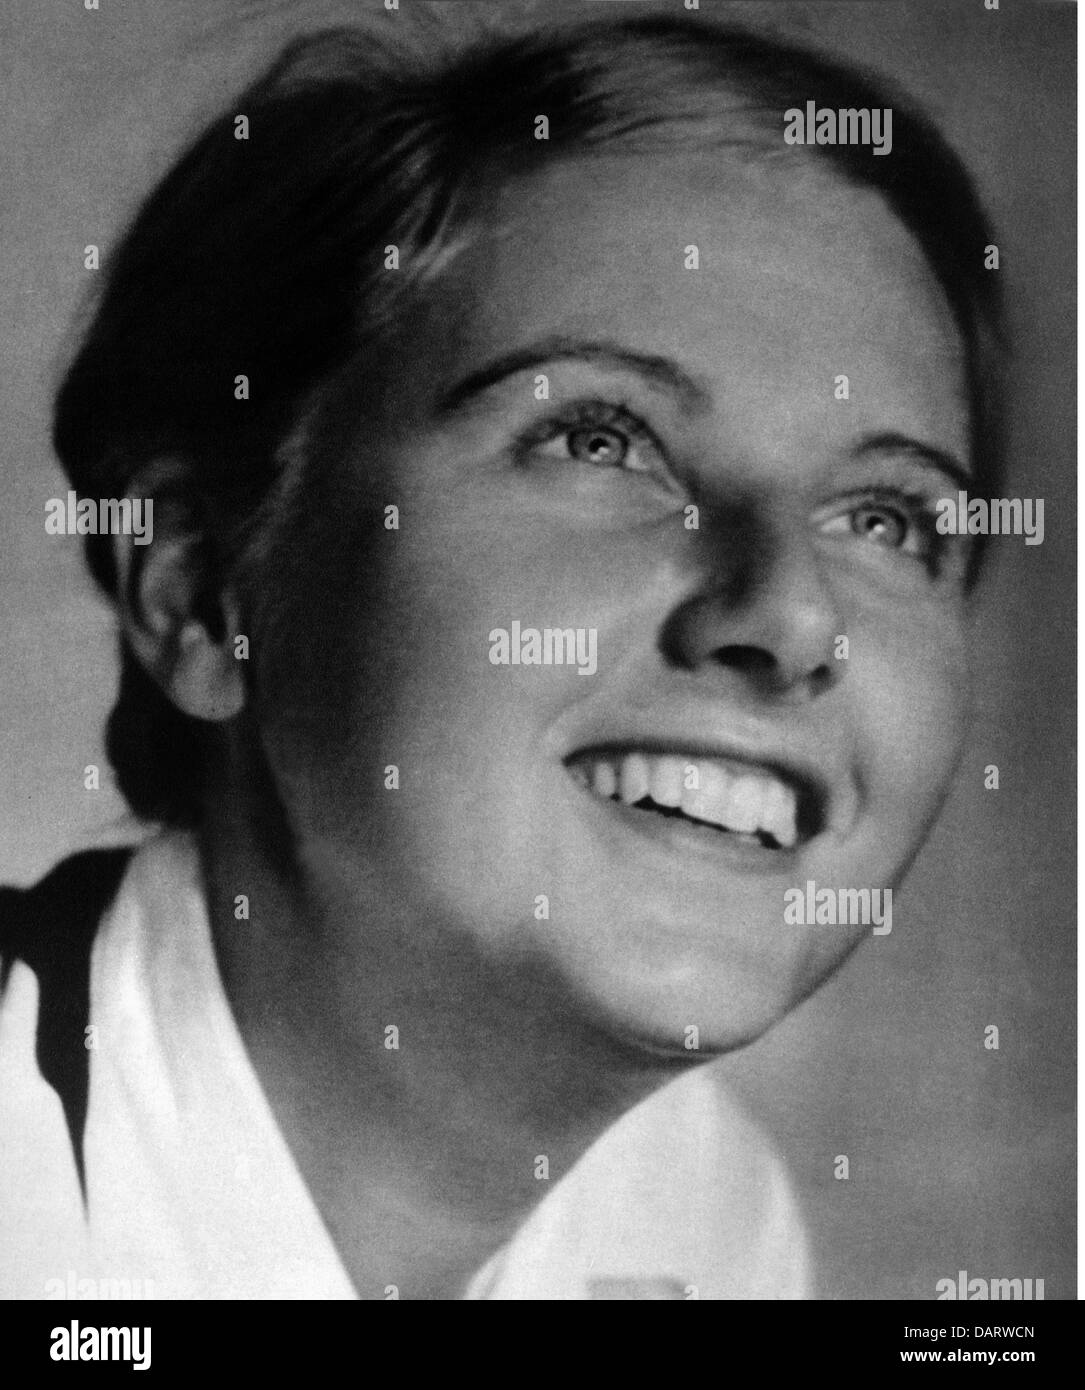 National Socialism, organisations, League of German Girls (Bund Deutscher Maedel, BDM), BDM maiden, portrait, late 1930s, Additional-Rights-Clearences-Not Available Stock Photo